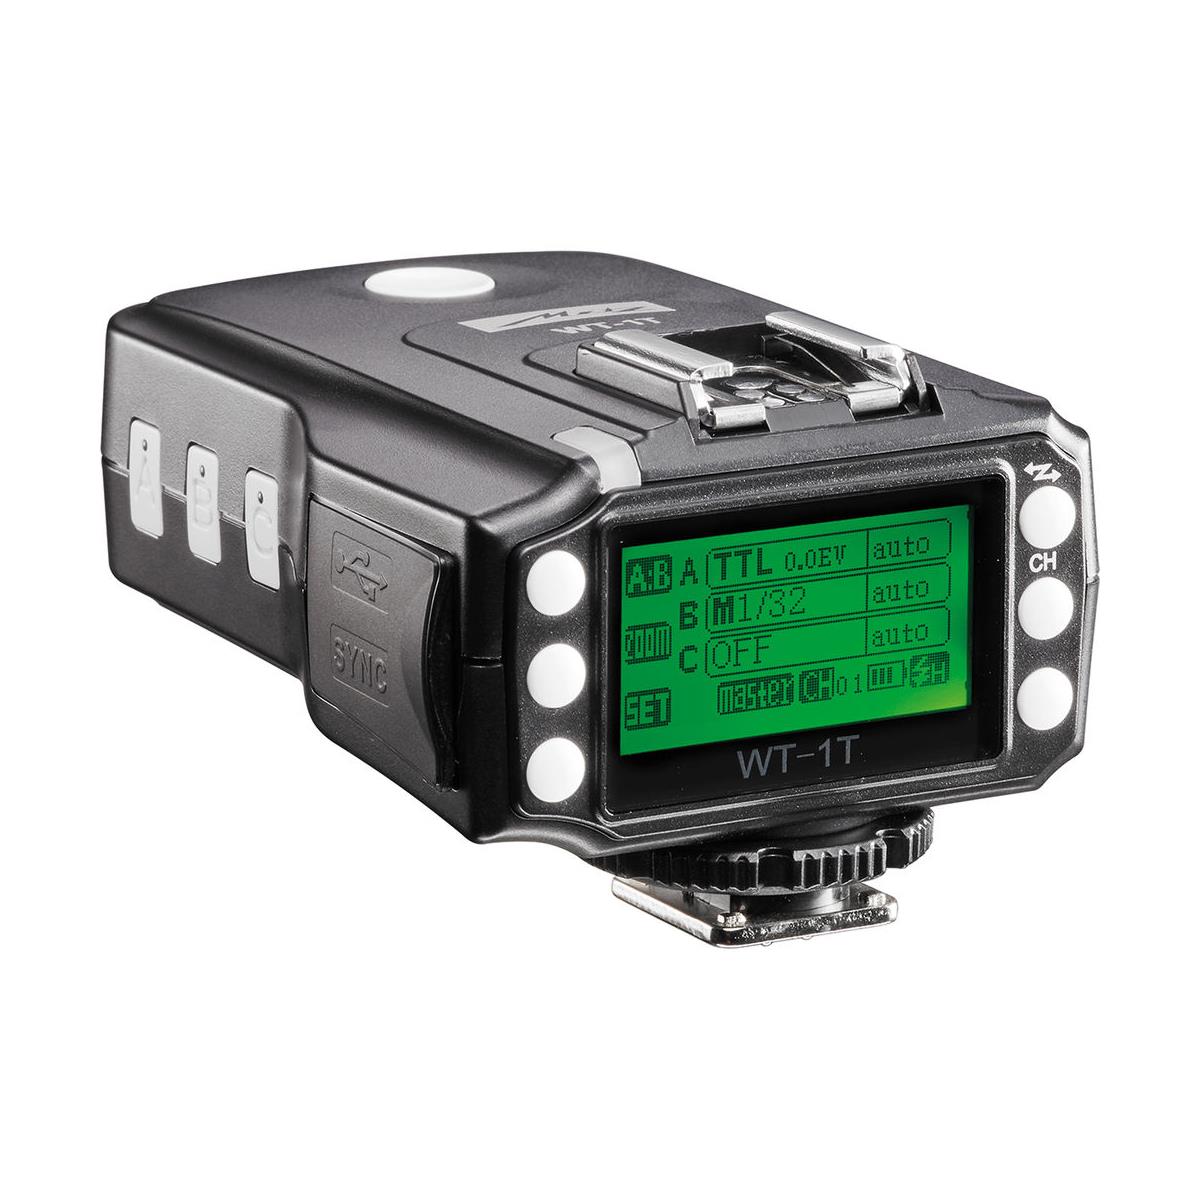 Image of Metz WT-1T Wireless Transceiver for Sony